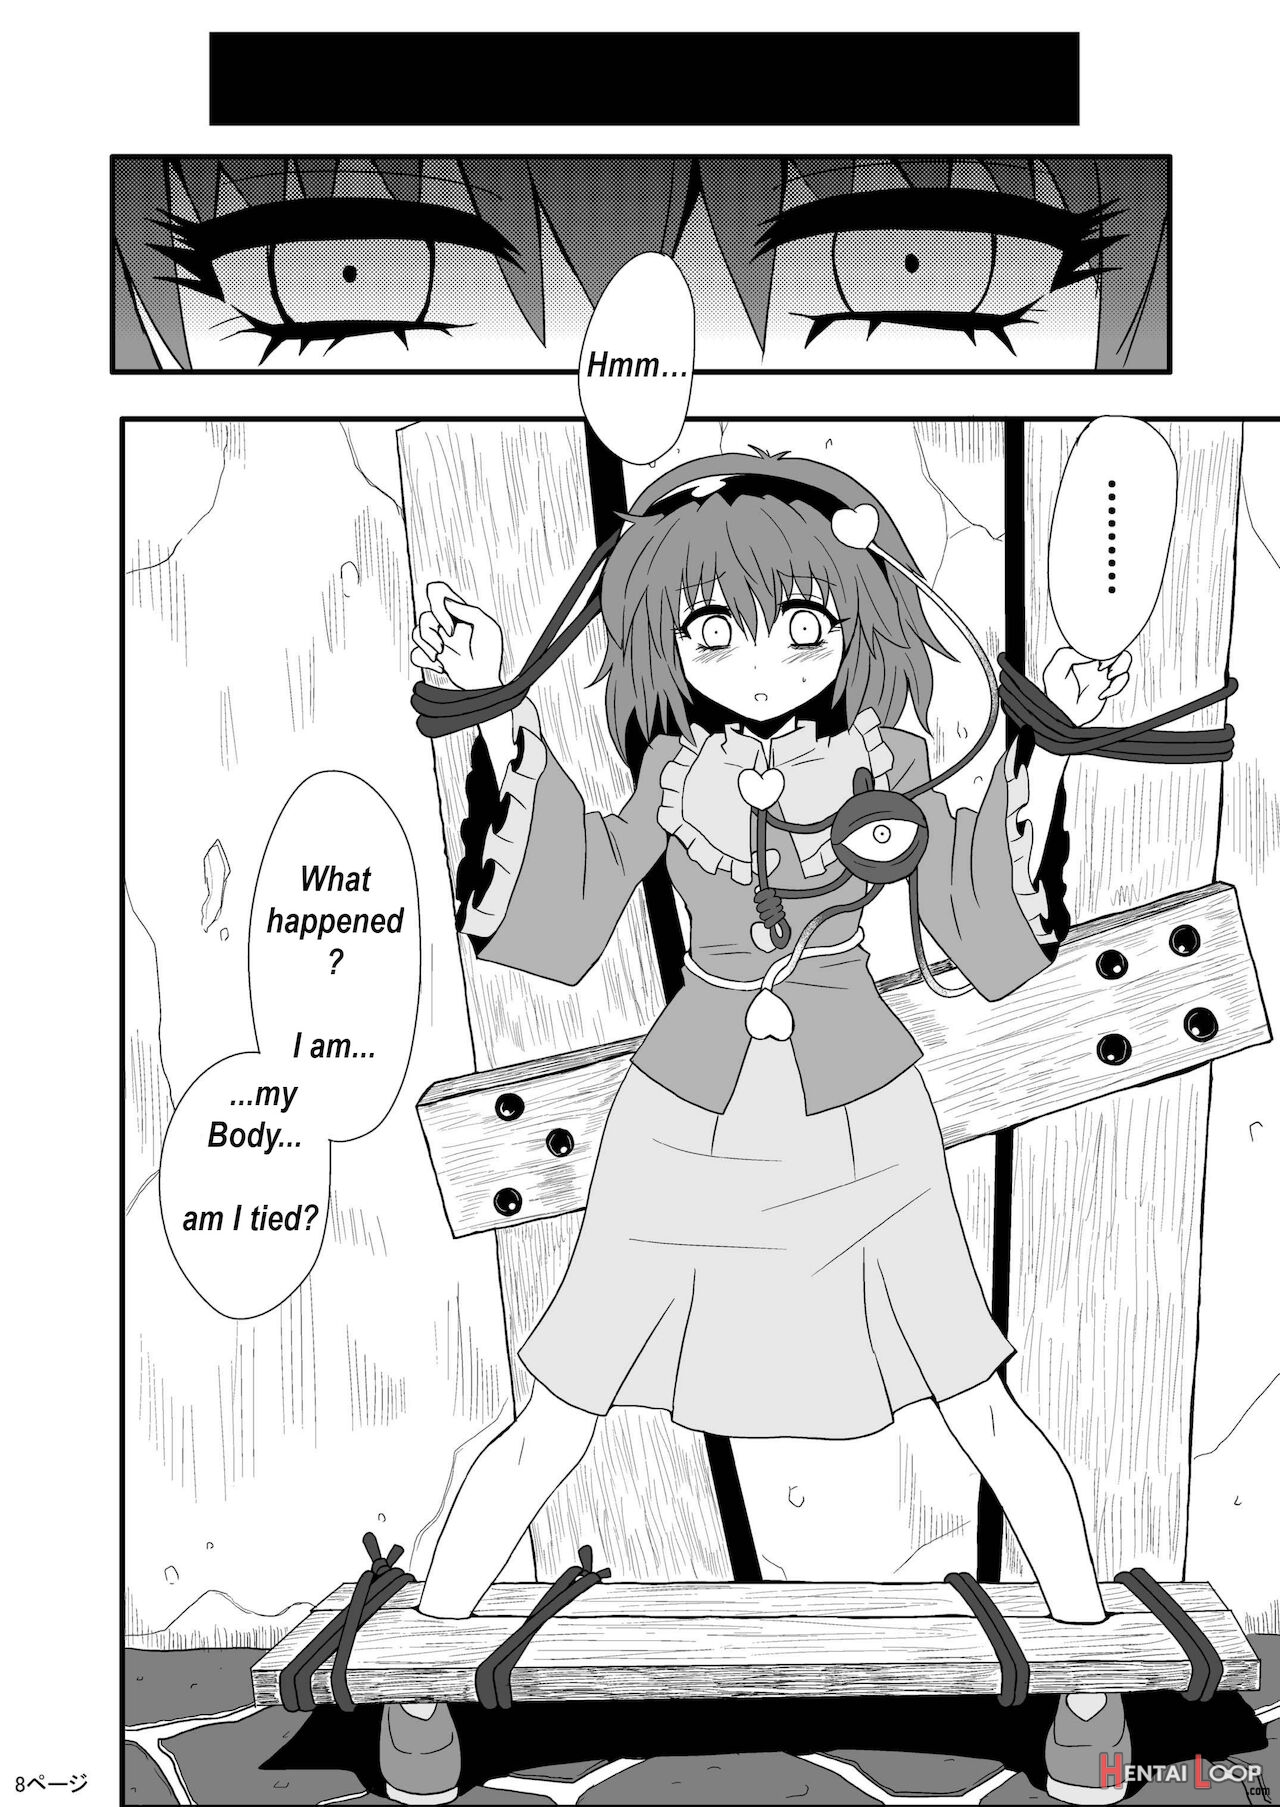 Marisa's Thrill - Take Care Of Yourself - 通り魔理沙にきをつけろ - Part 1 page 10